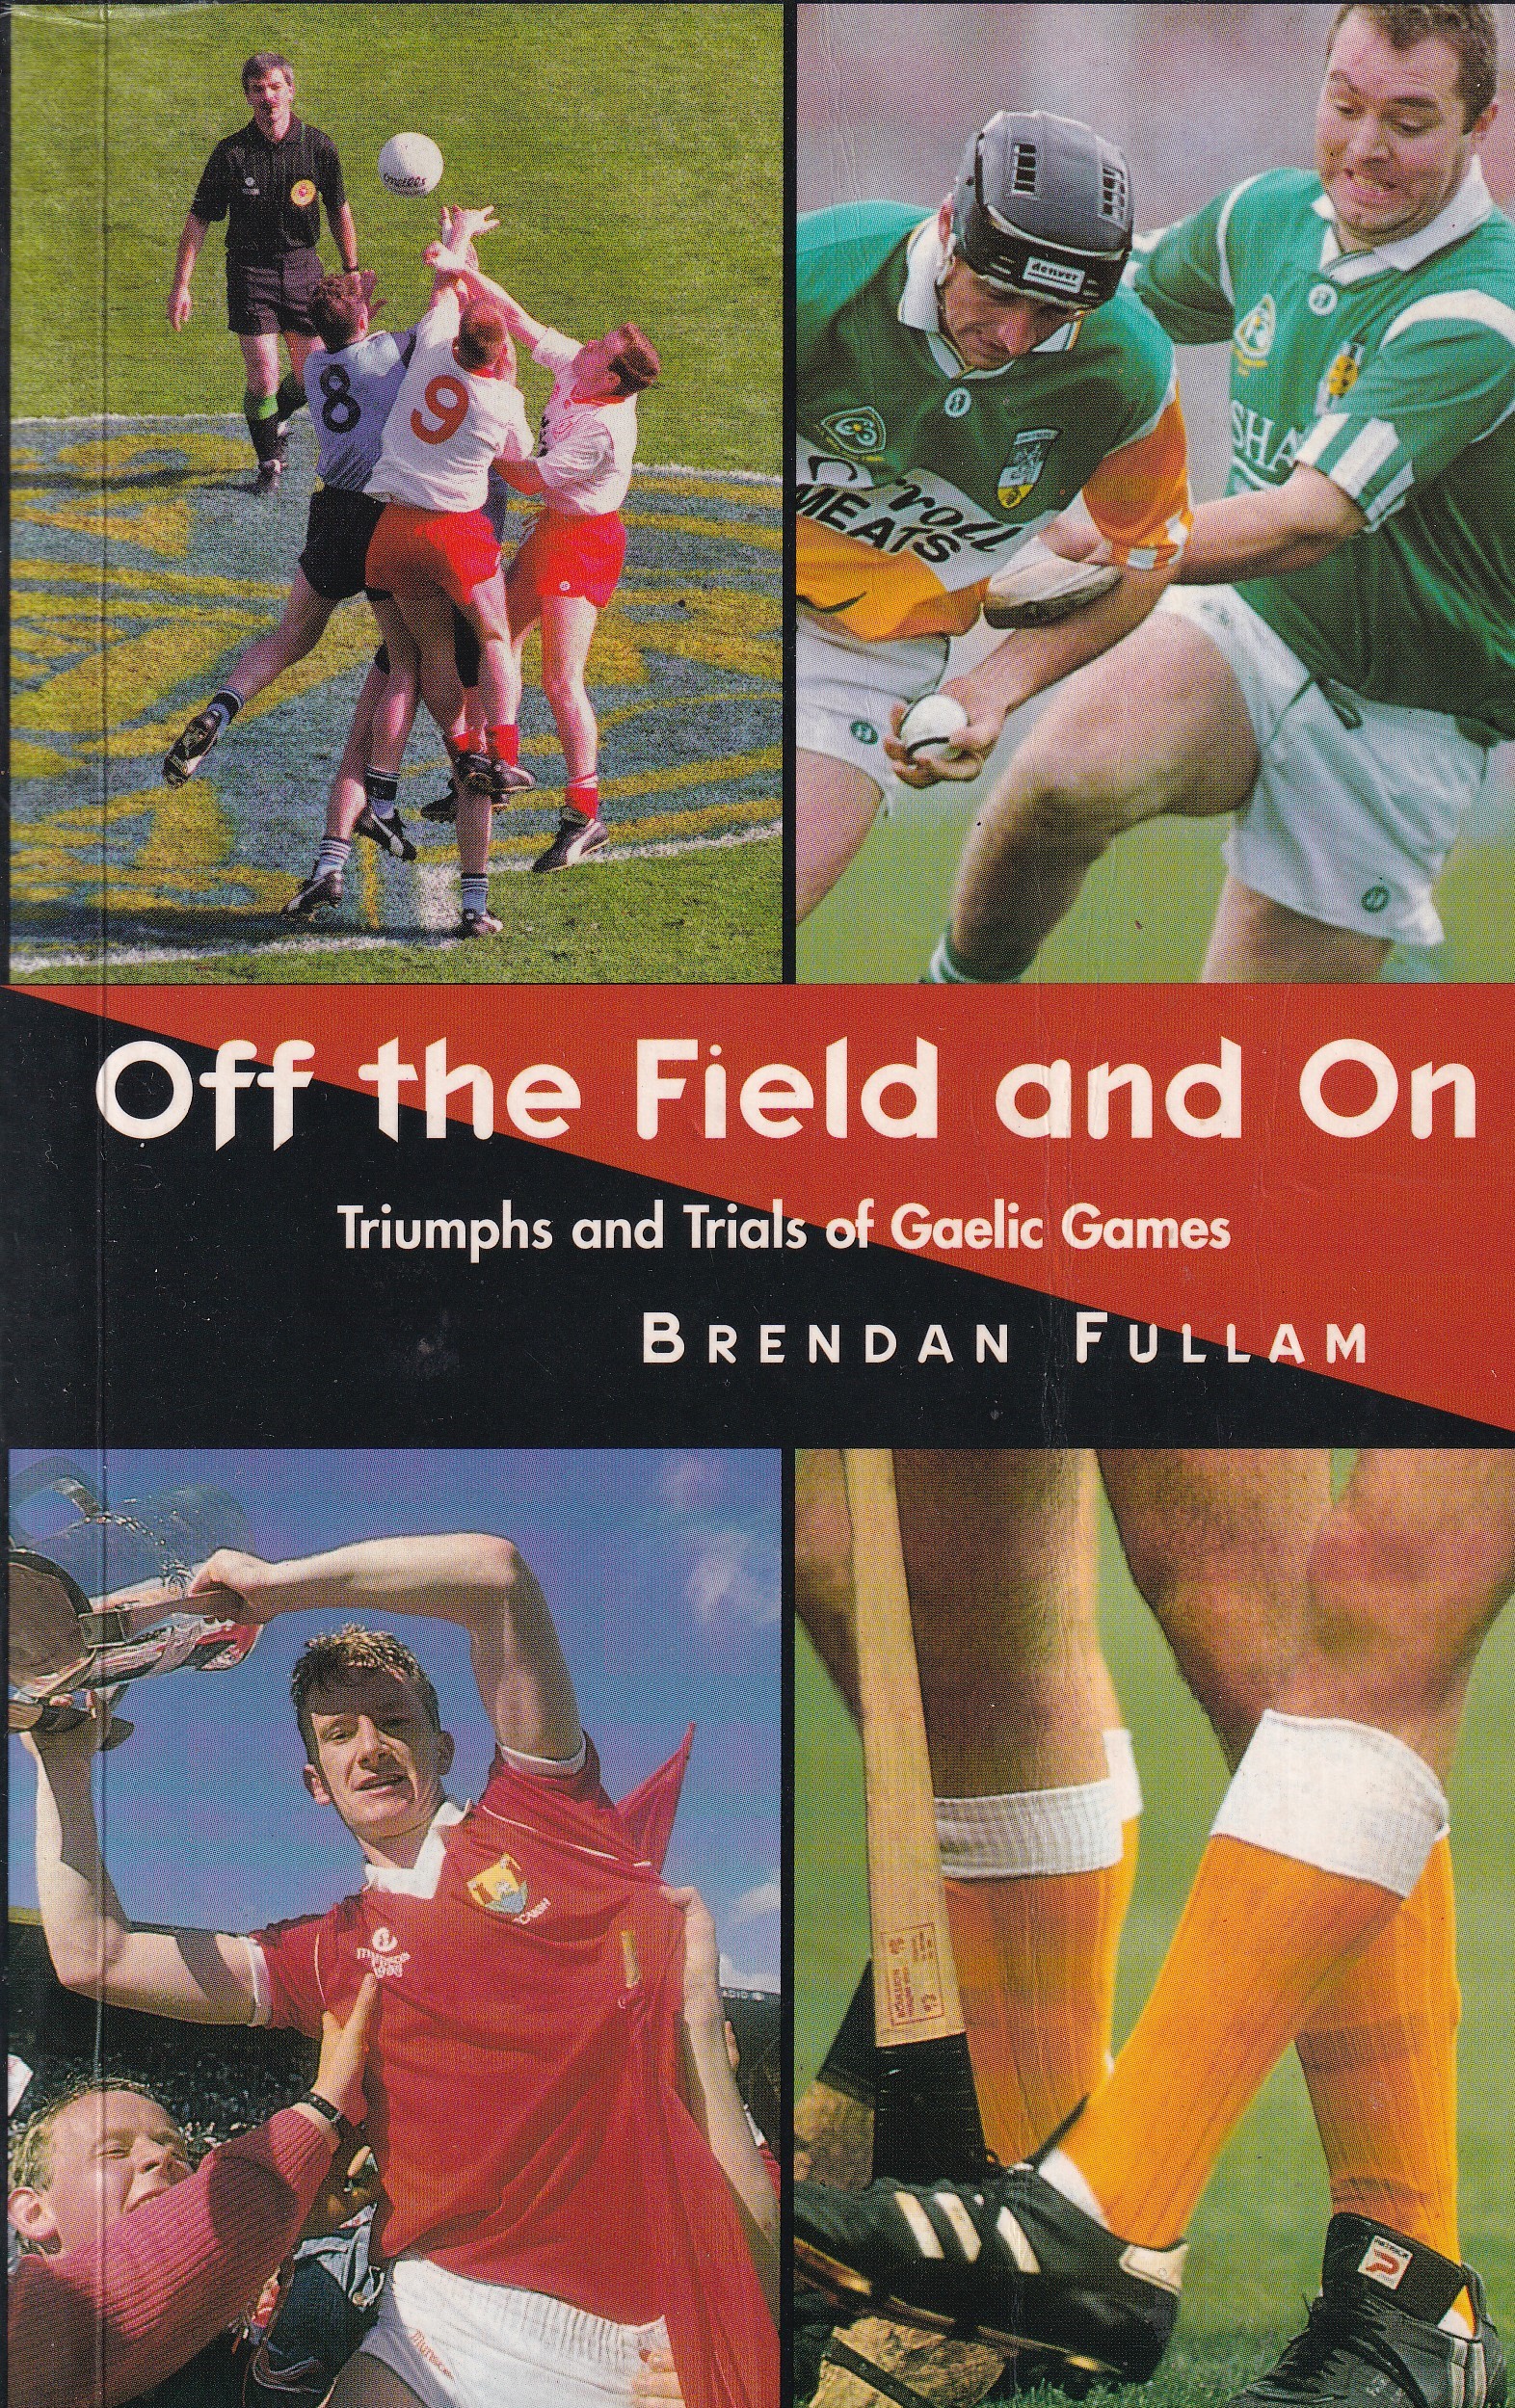 Off the Field and On: Triumphs and Trials of Gaelic Games by Brendan Fullam